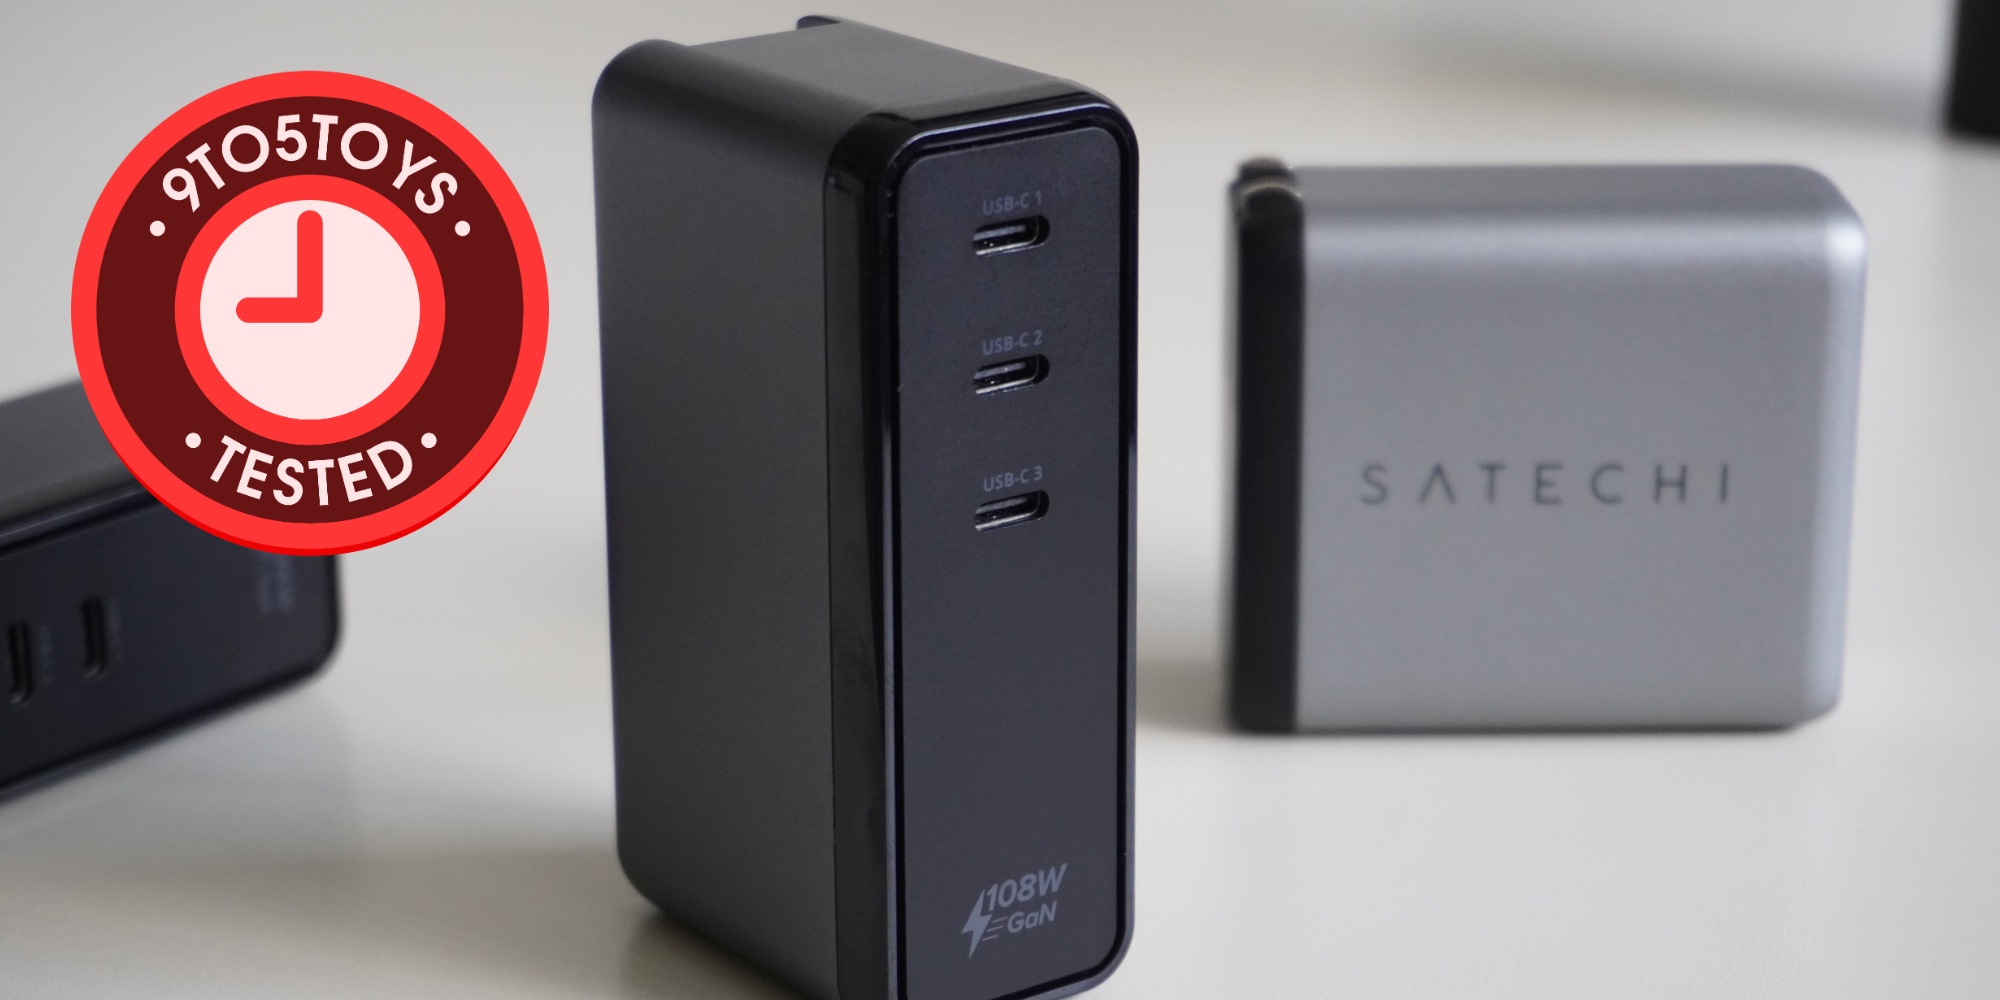 Satechi USB-C charger hands-on: Pricy premium - 9to5Toys